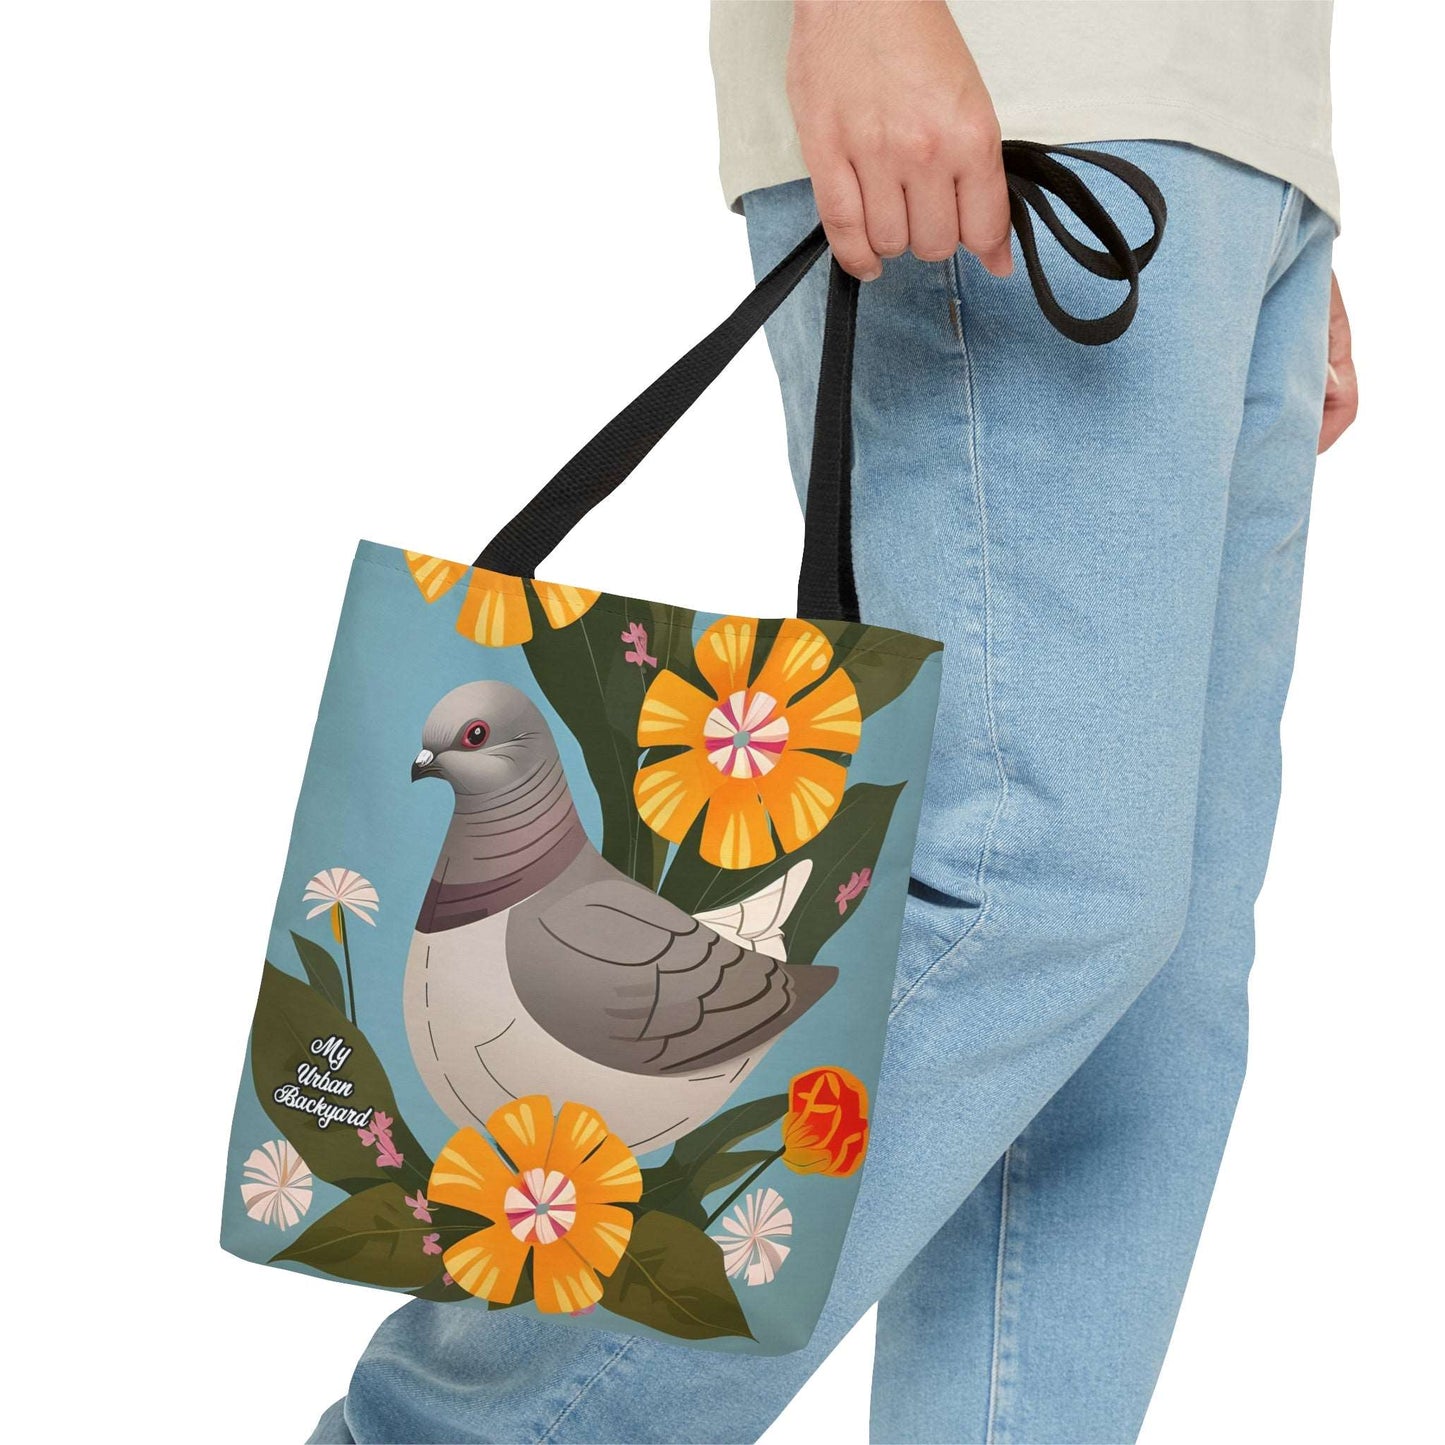 Everyday Tote Bag w Cotton Handles, Reusable Shoulder Bag, Pigeon and Yellow Flowers